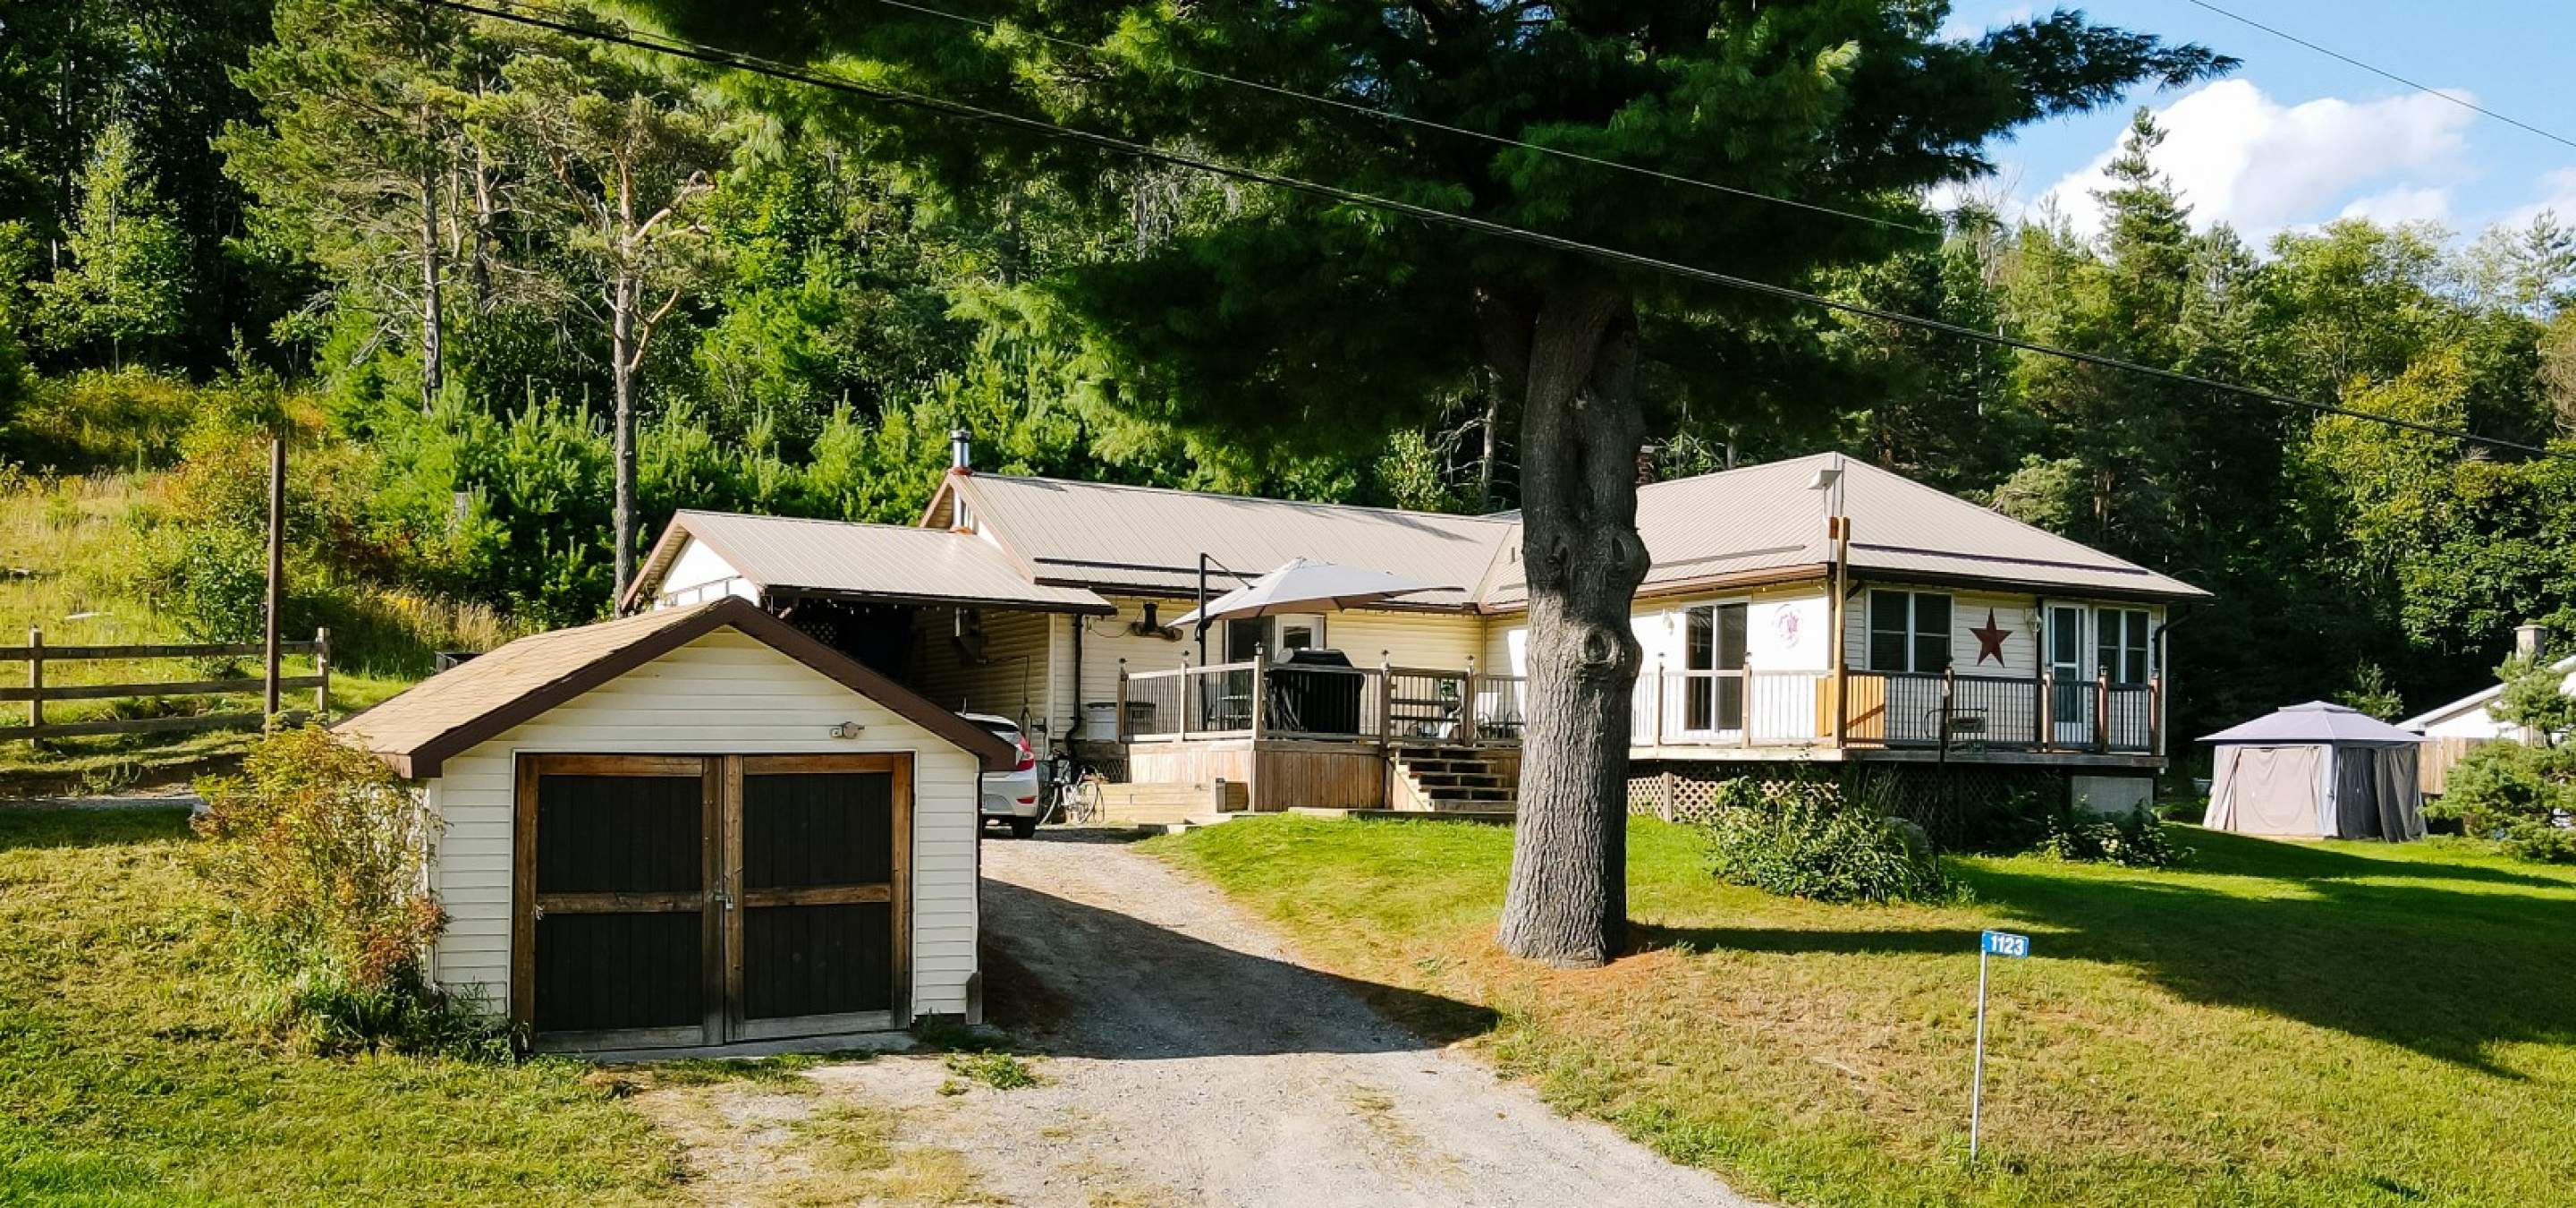 Home surrounded by trees with a grass front lawn and large deck. Gravel laneway leading to home and garage.